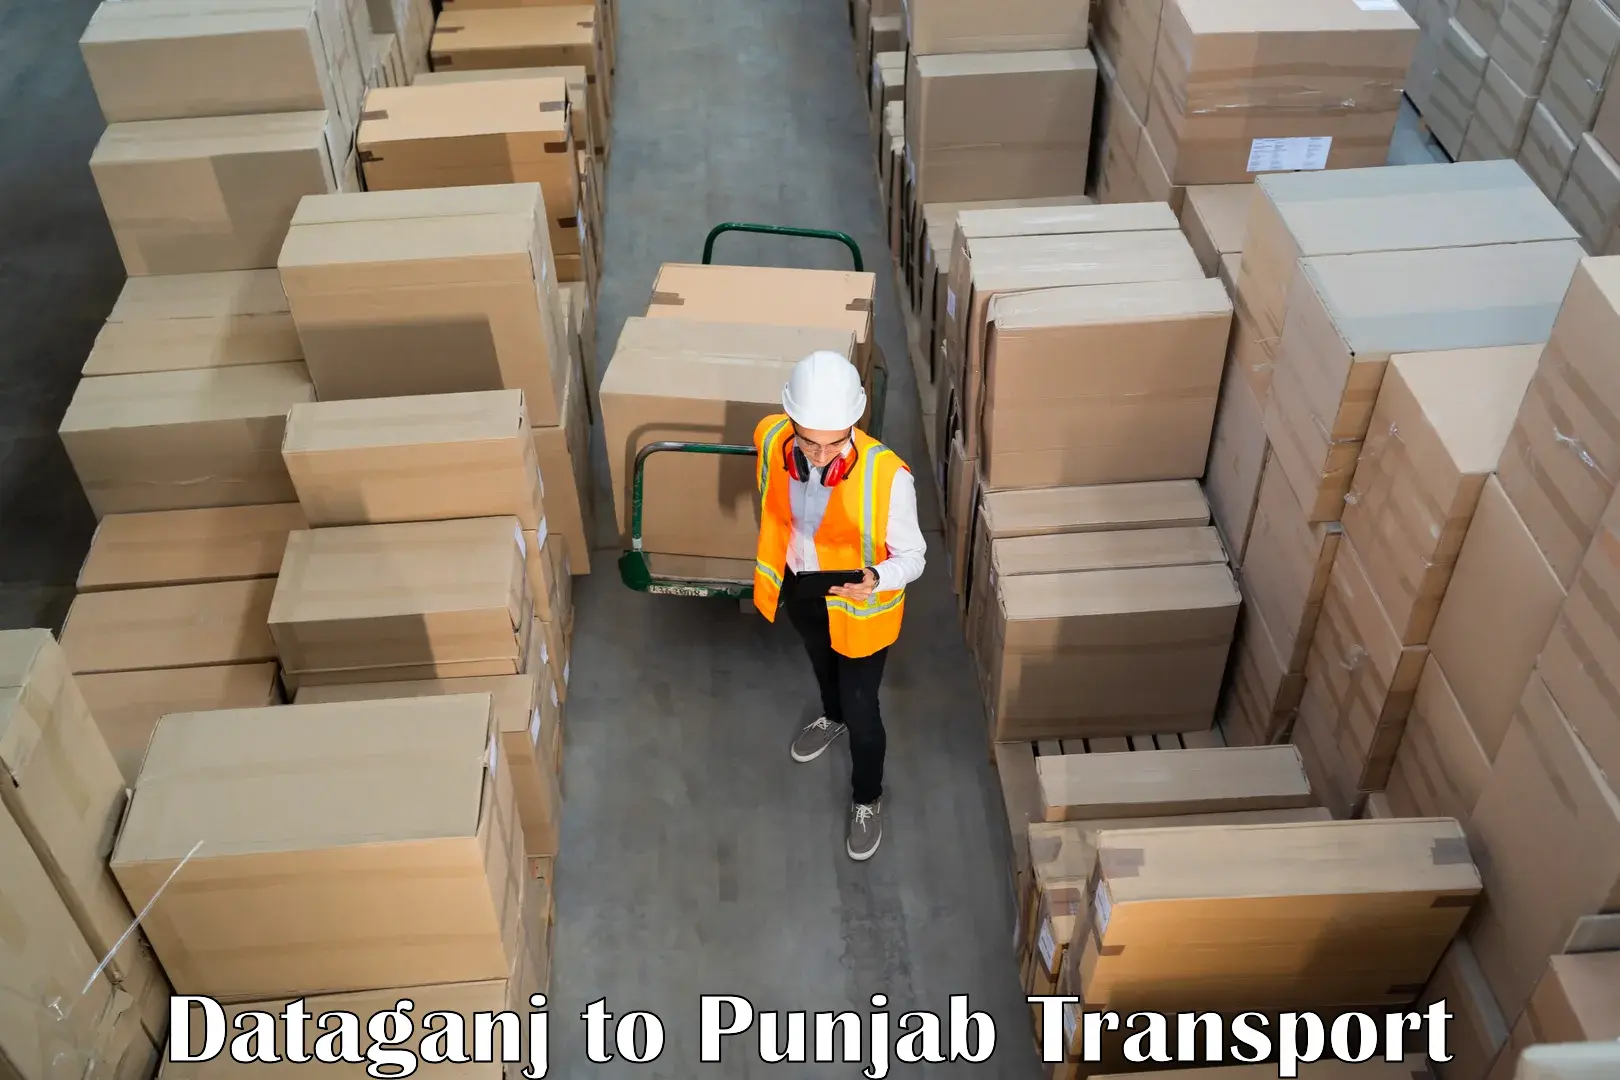 Container transport service Dataganj to Sultanpur Lodhi